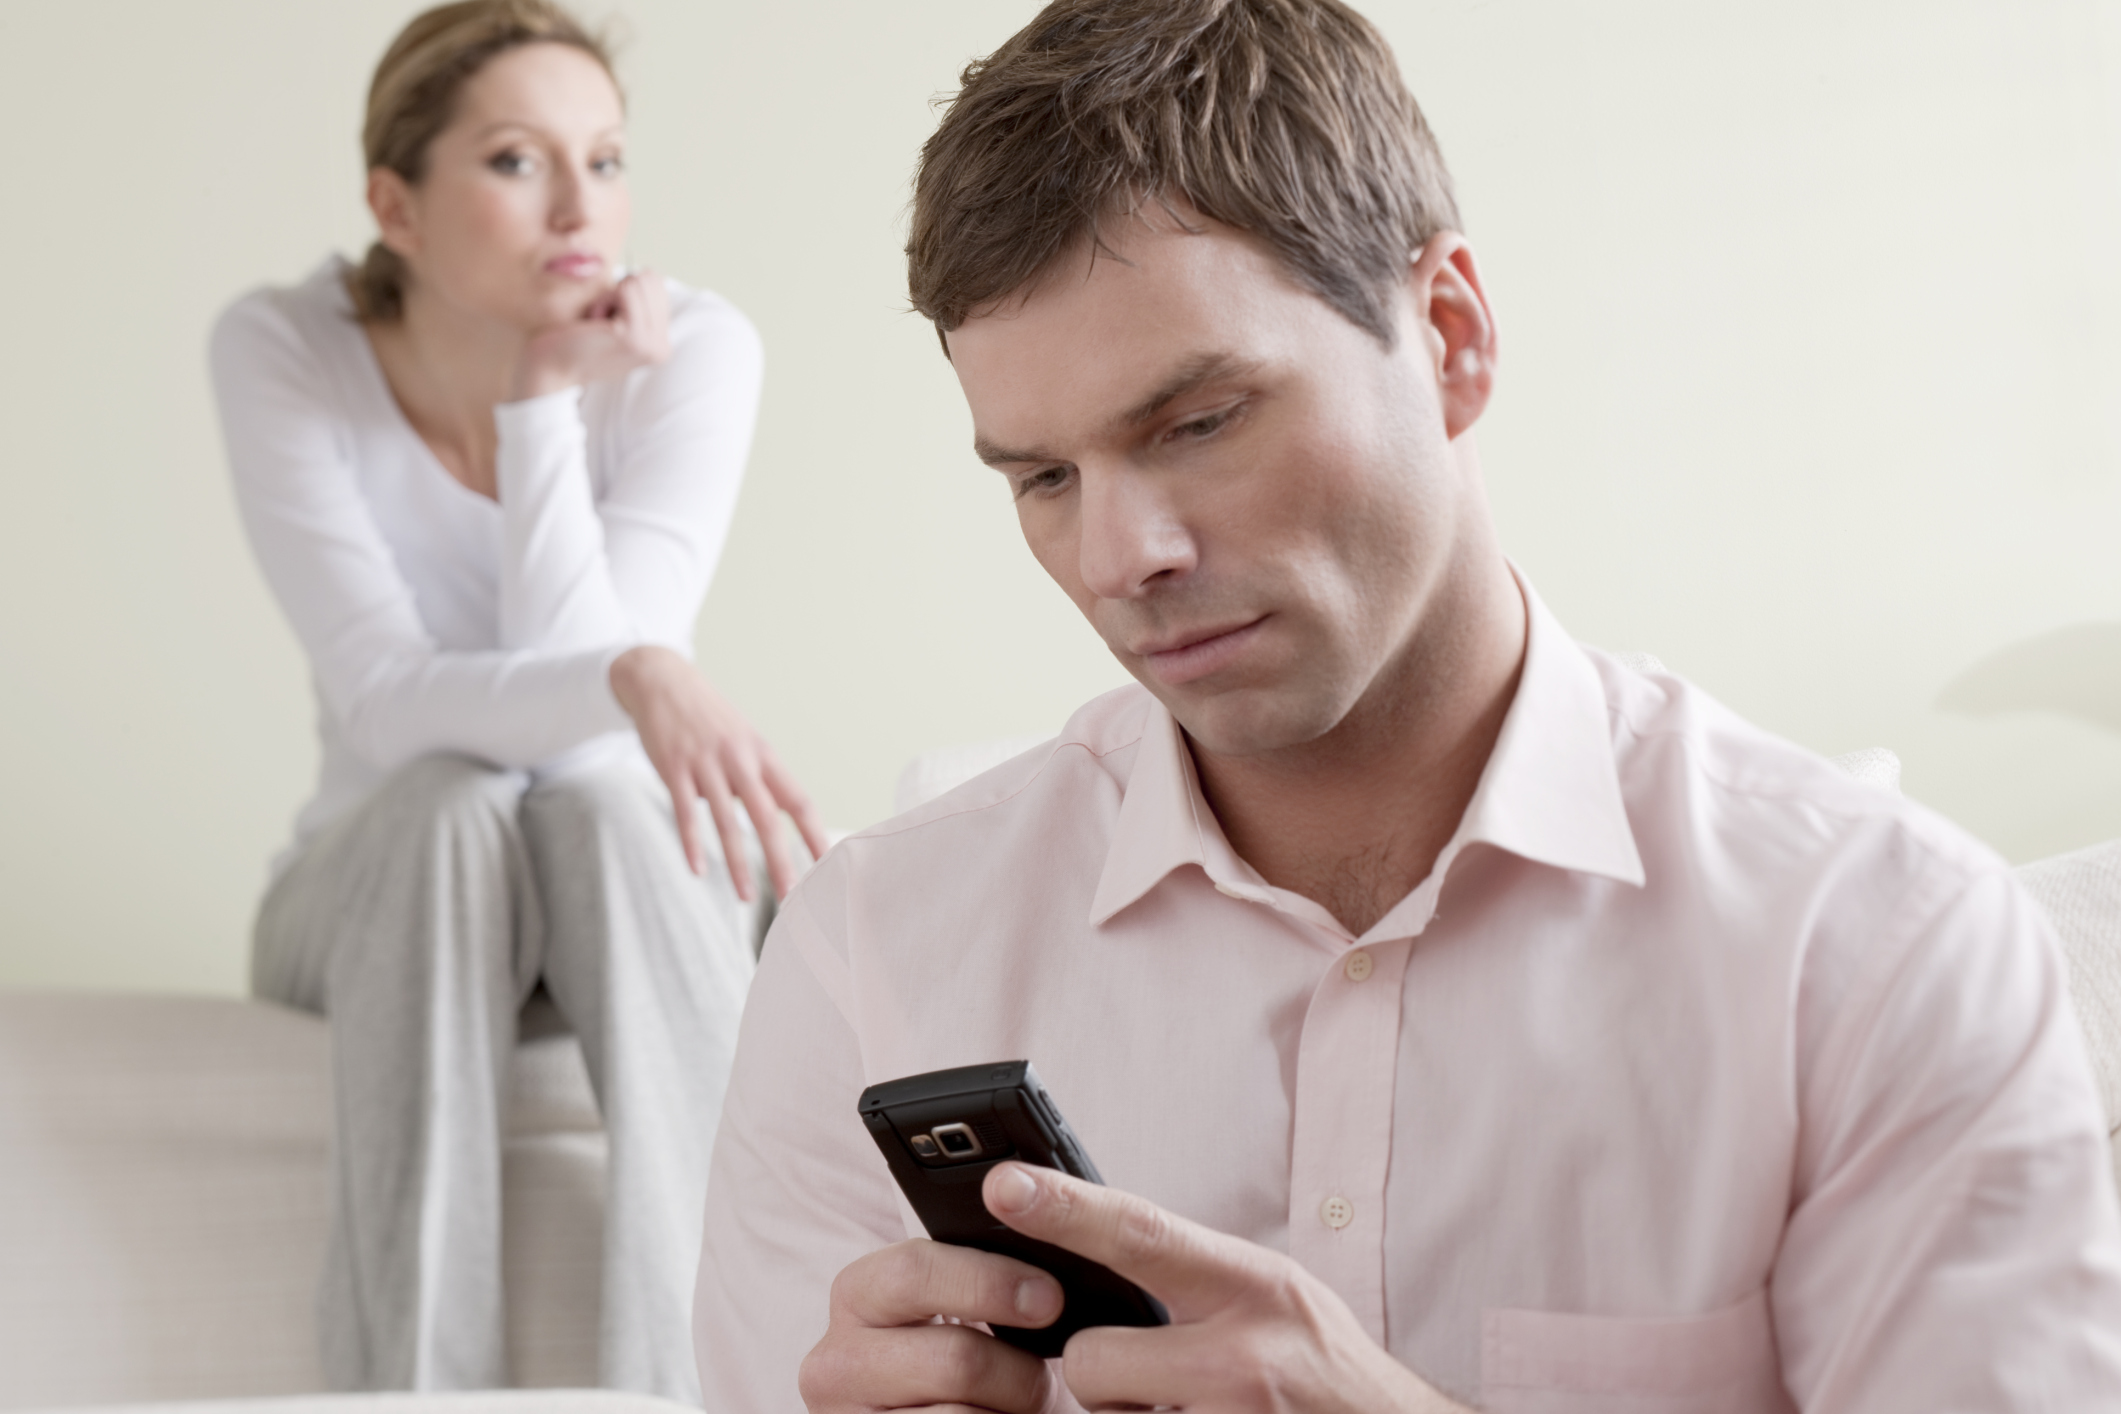 4 Tips on How To Recover From Infidelity | Stay at Home Mum